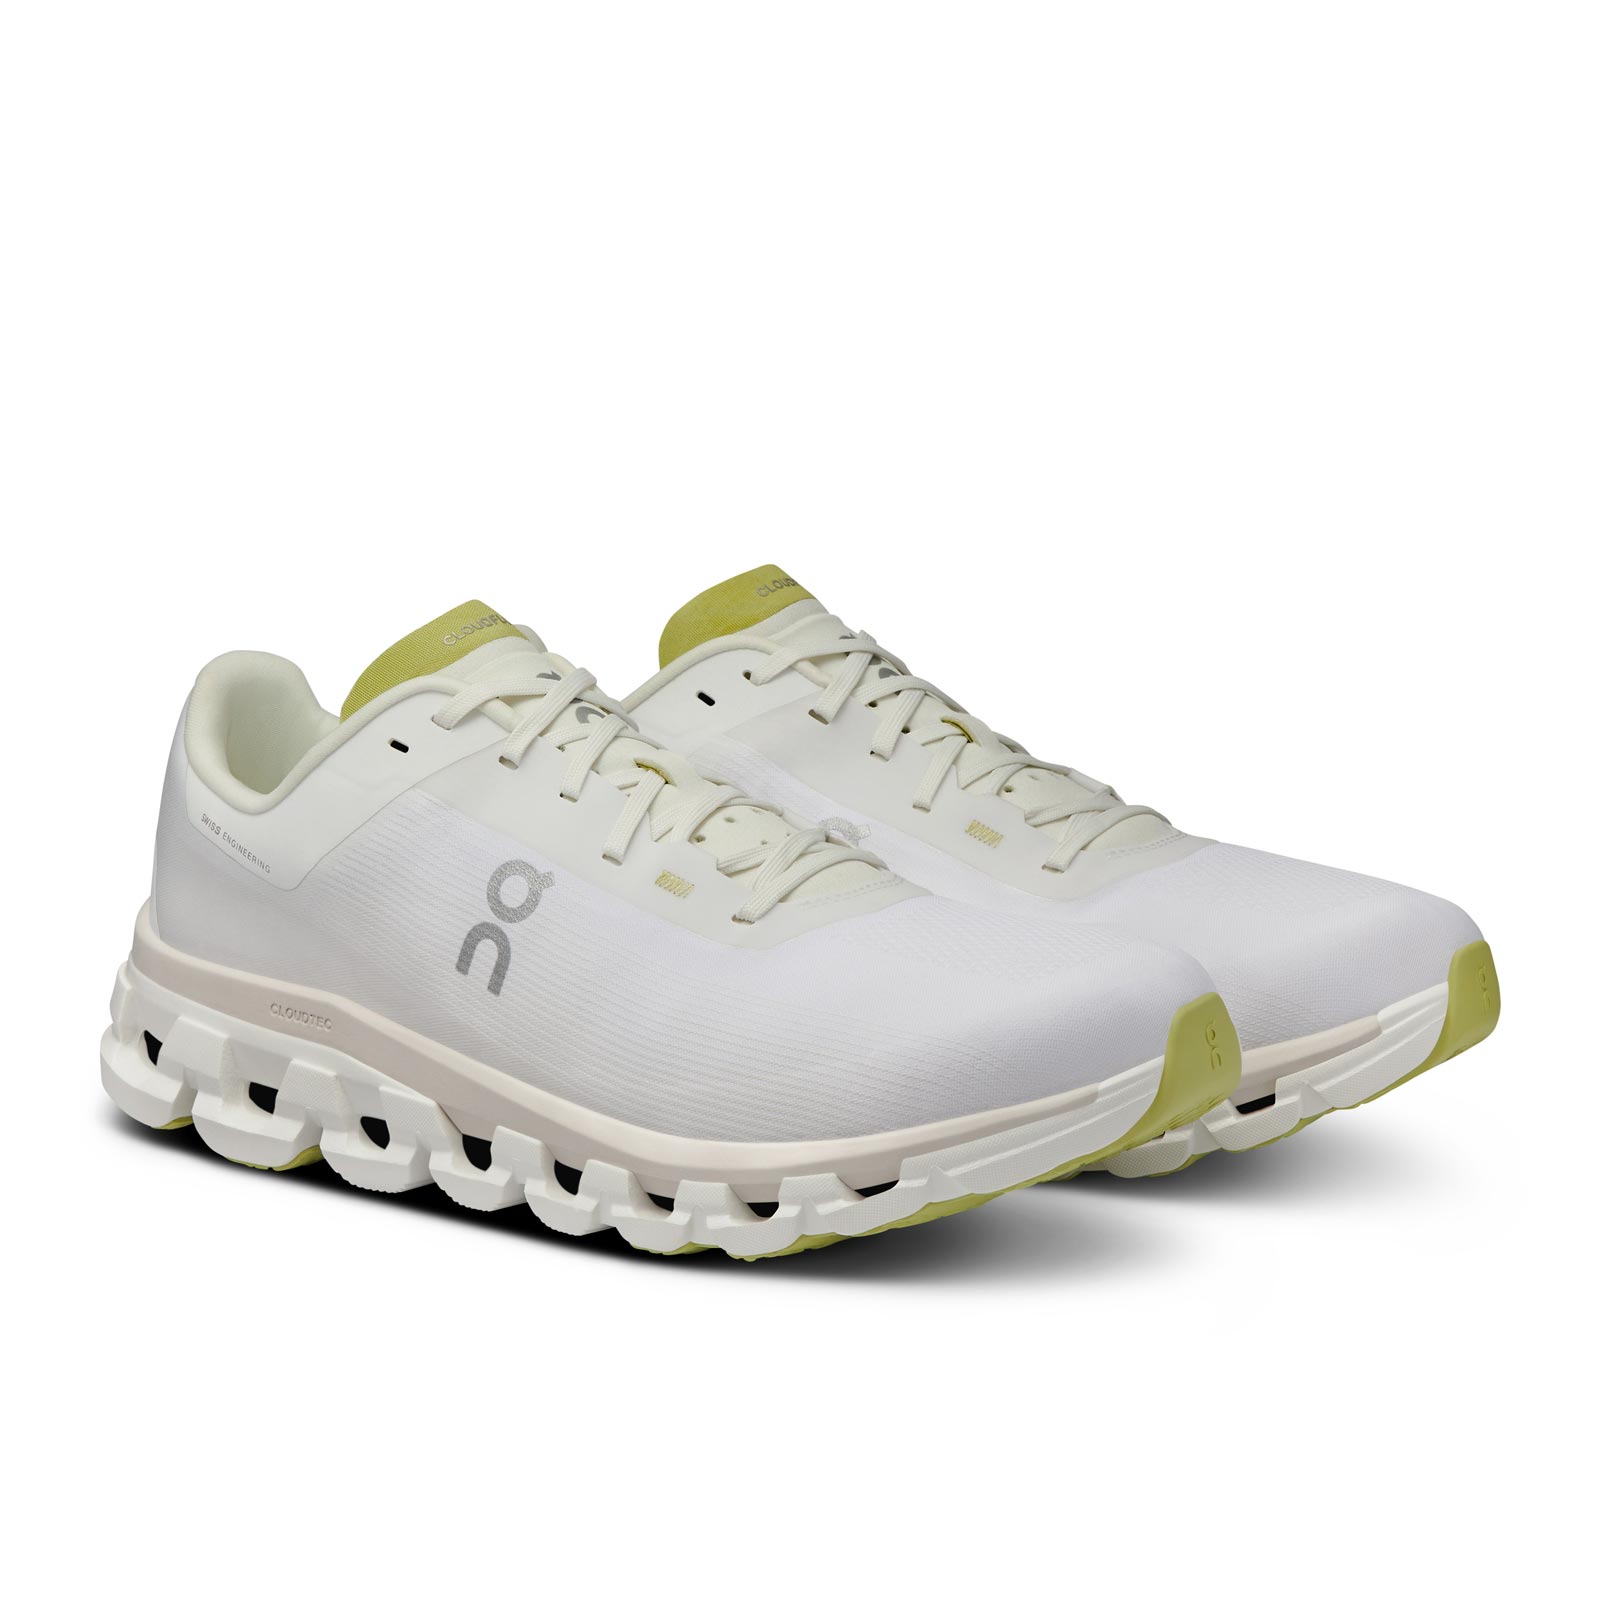 ON CLOUDFLOW 4 MENS RUNNING SHOES